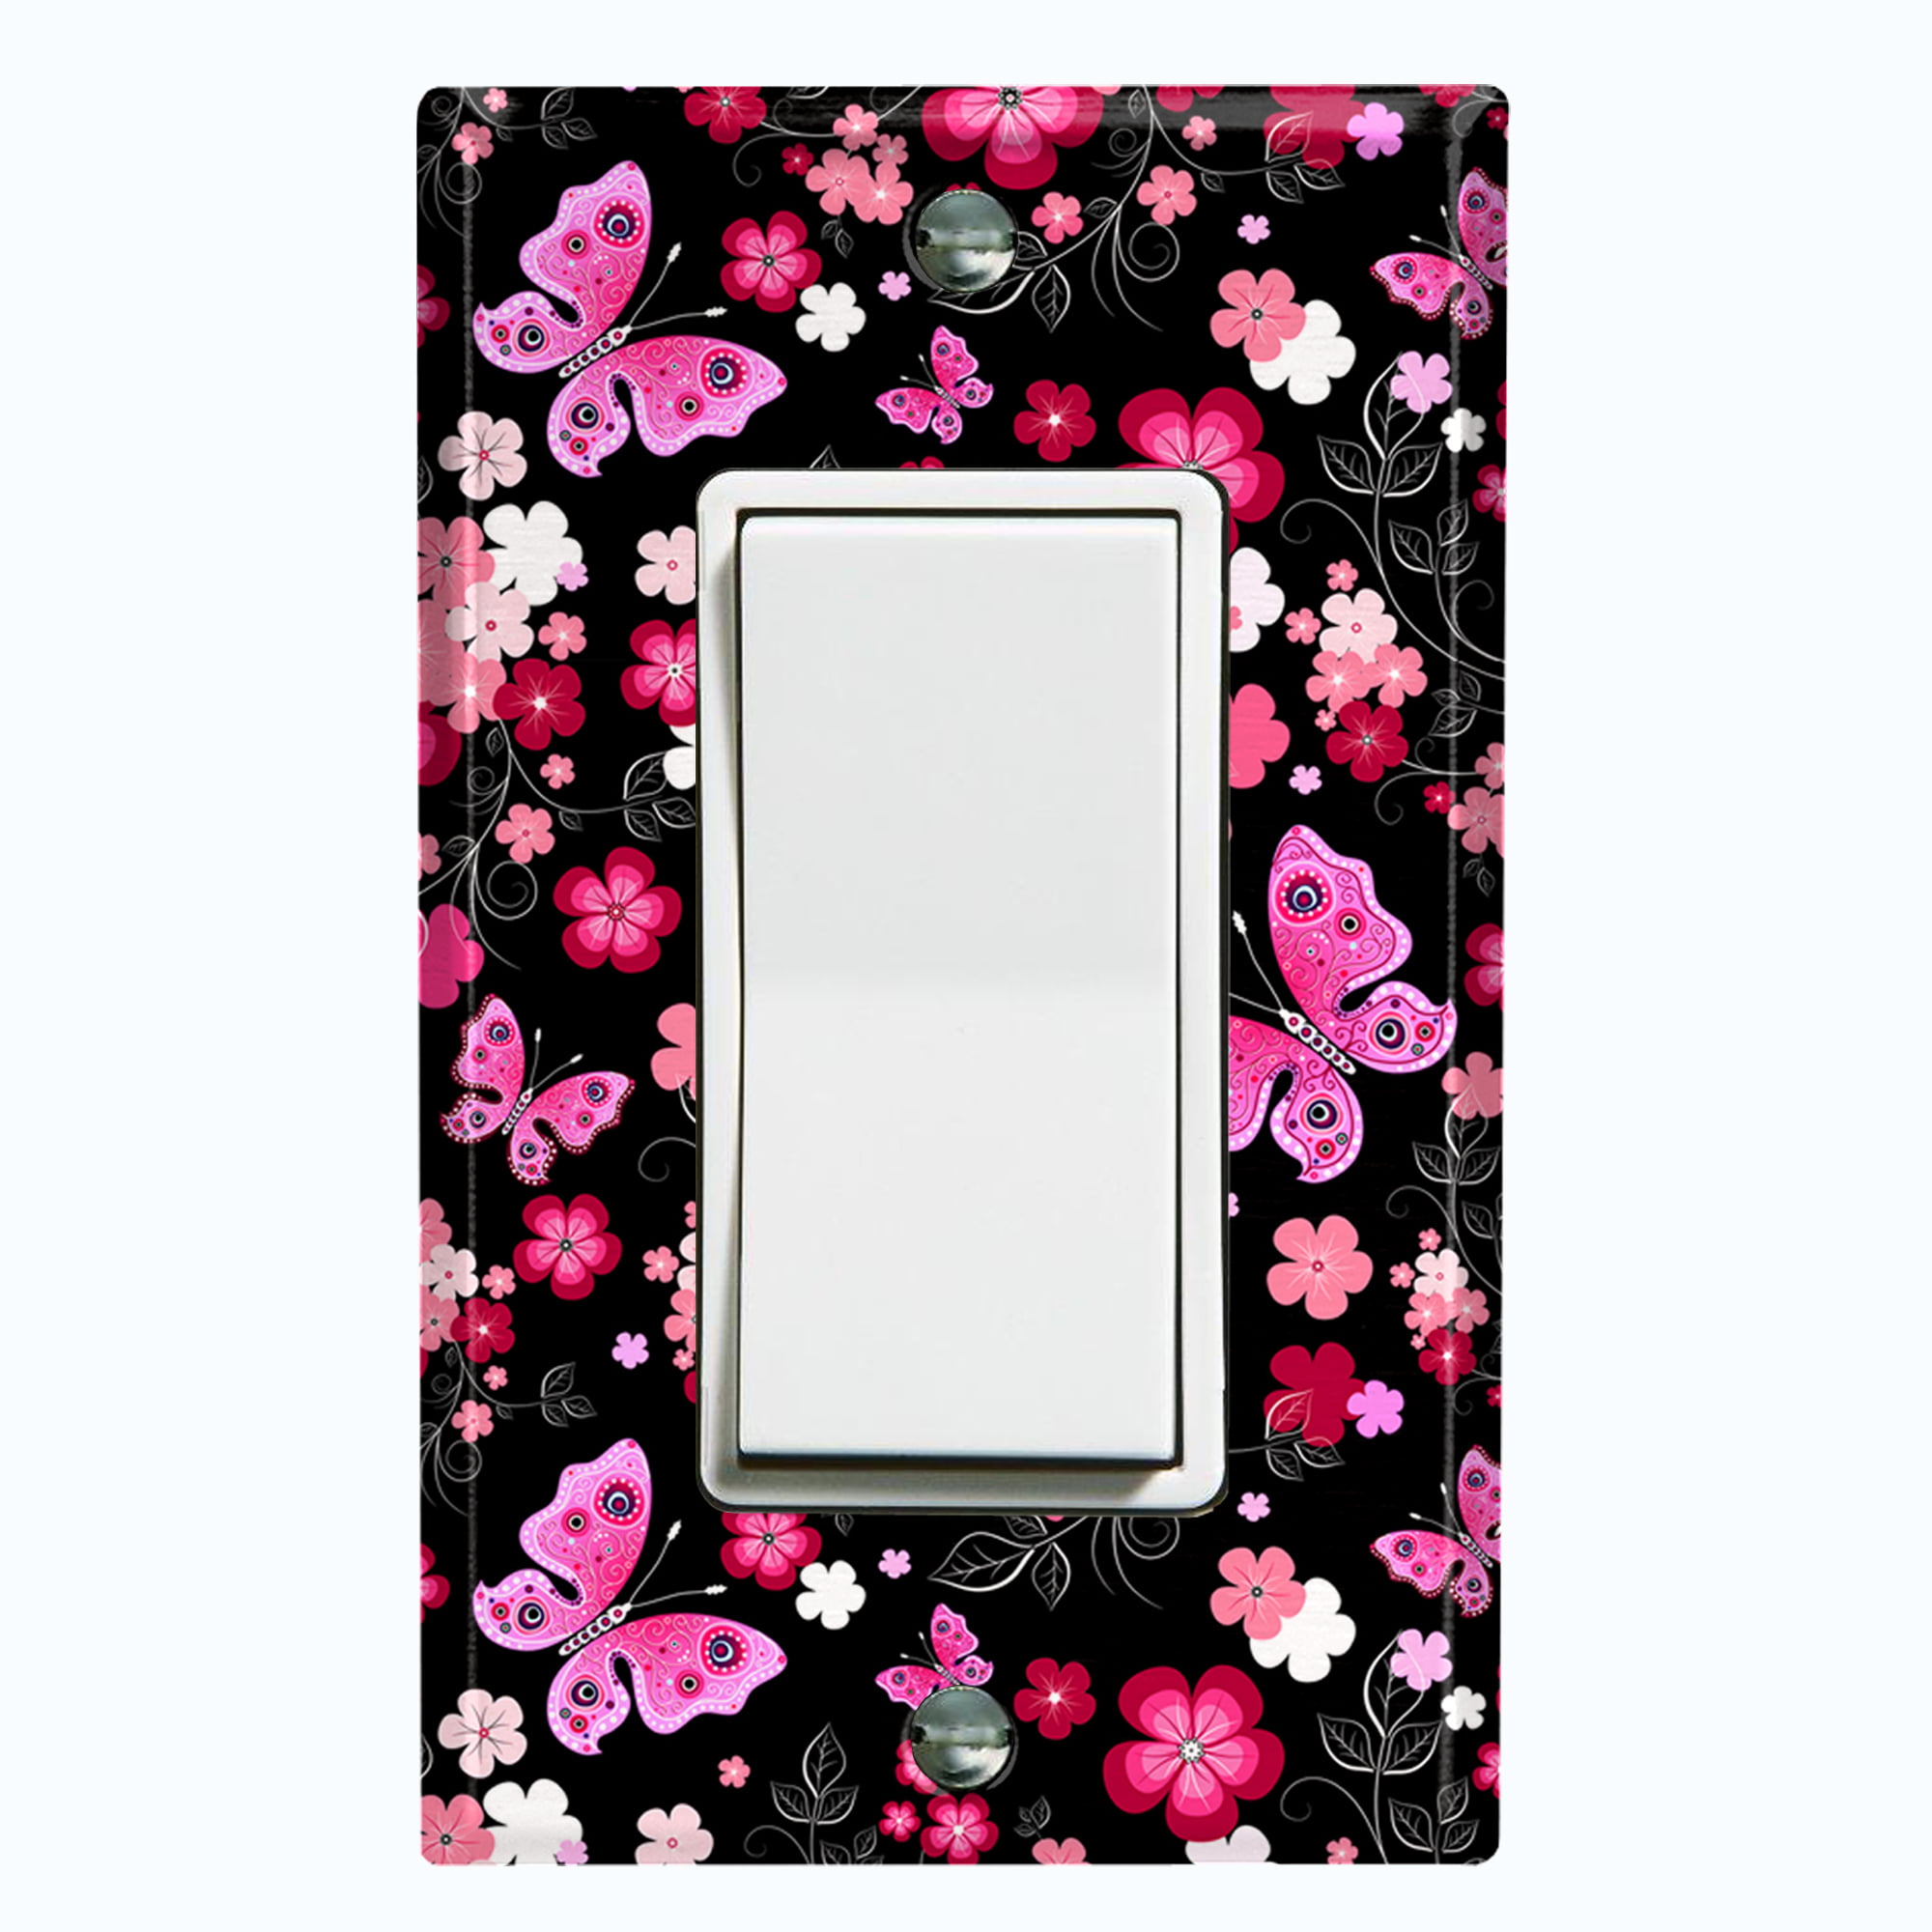 BEAUTIFUL ROSES & BUTTERFLY IMAGE LIGHT SWITCH OR OUTLET COVER V003 